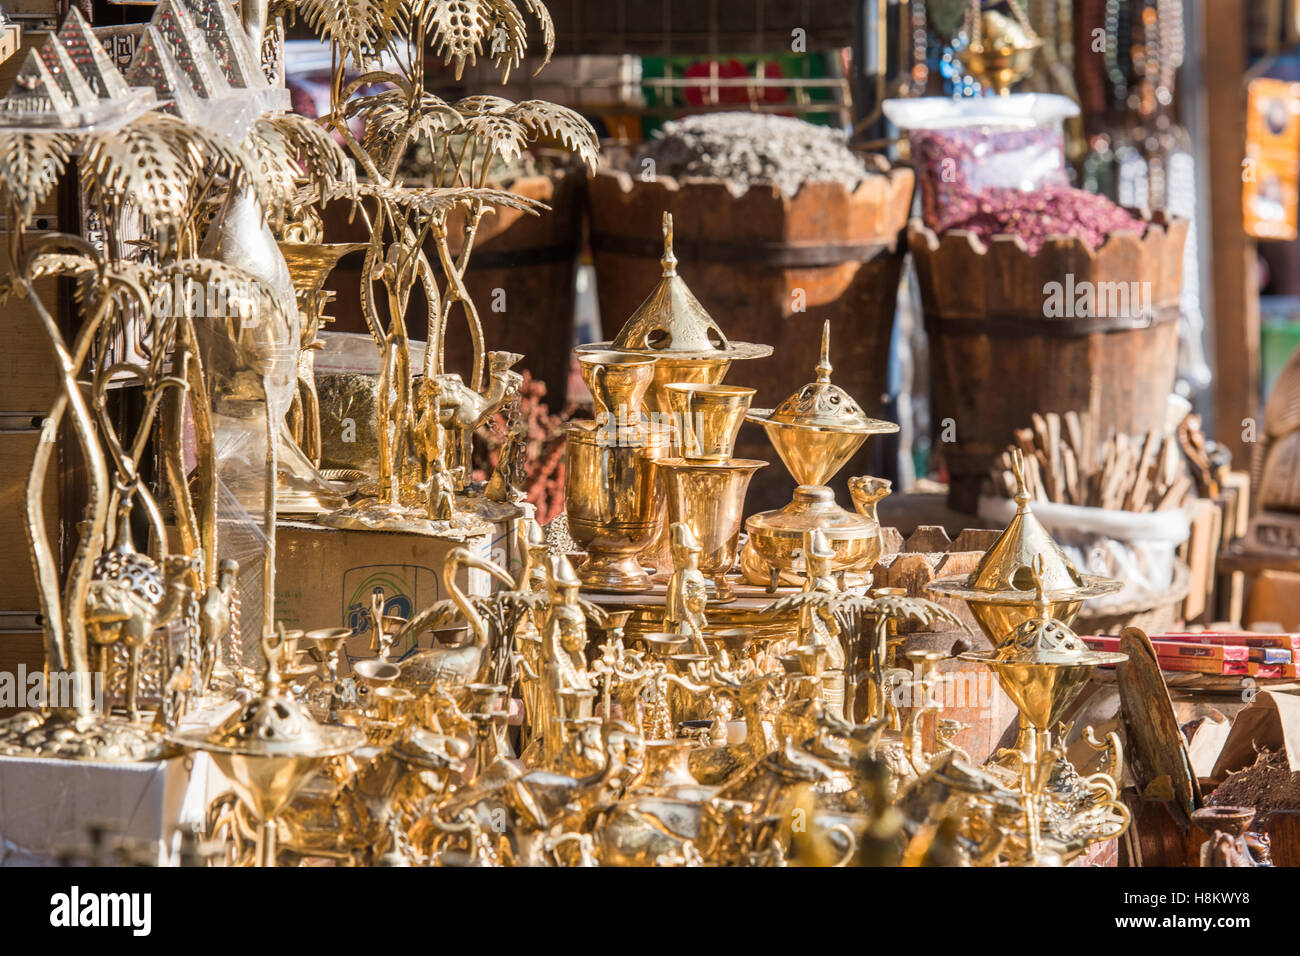 Cairo, Egypt. Close up of gold statues and replicas of buildings for sale in the outdoor bazaar/ flea market Khan el-Khalili in Stock Photo